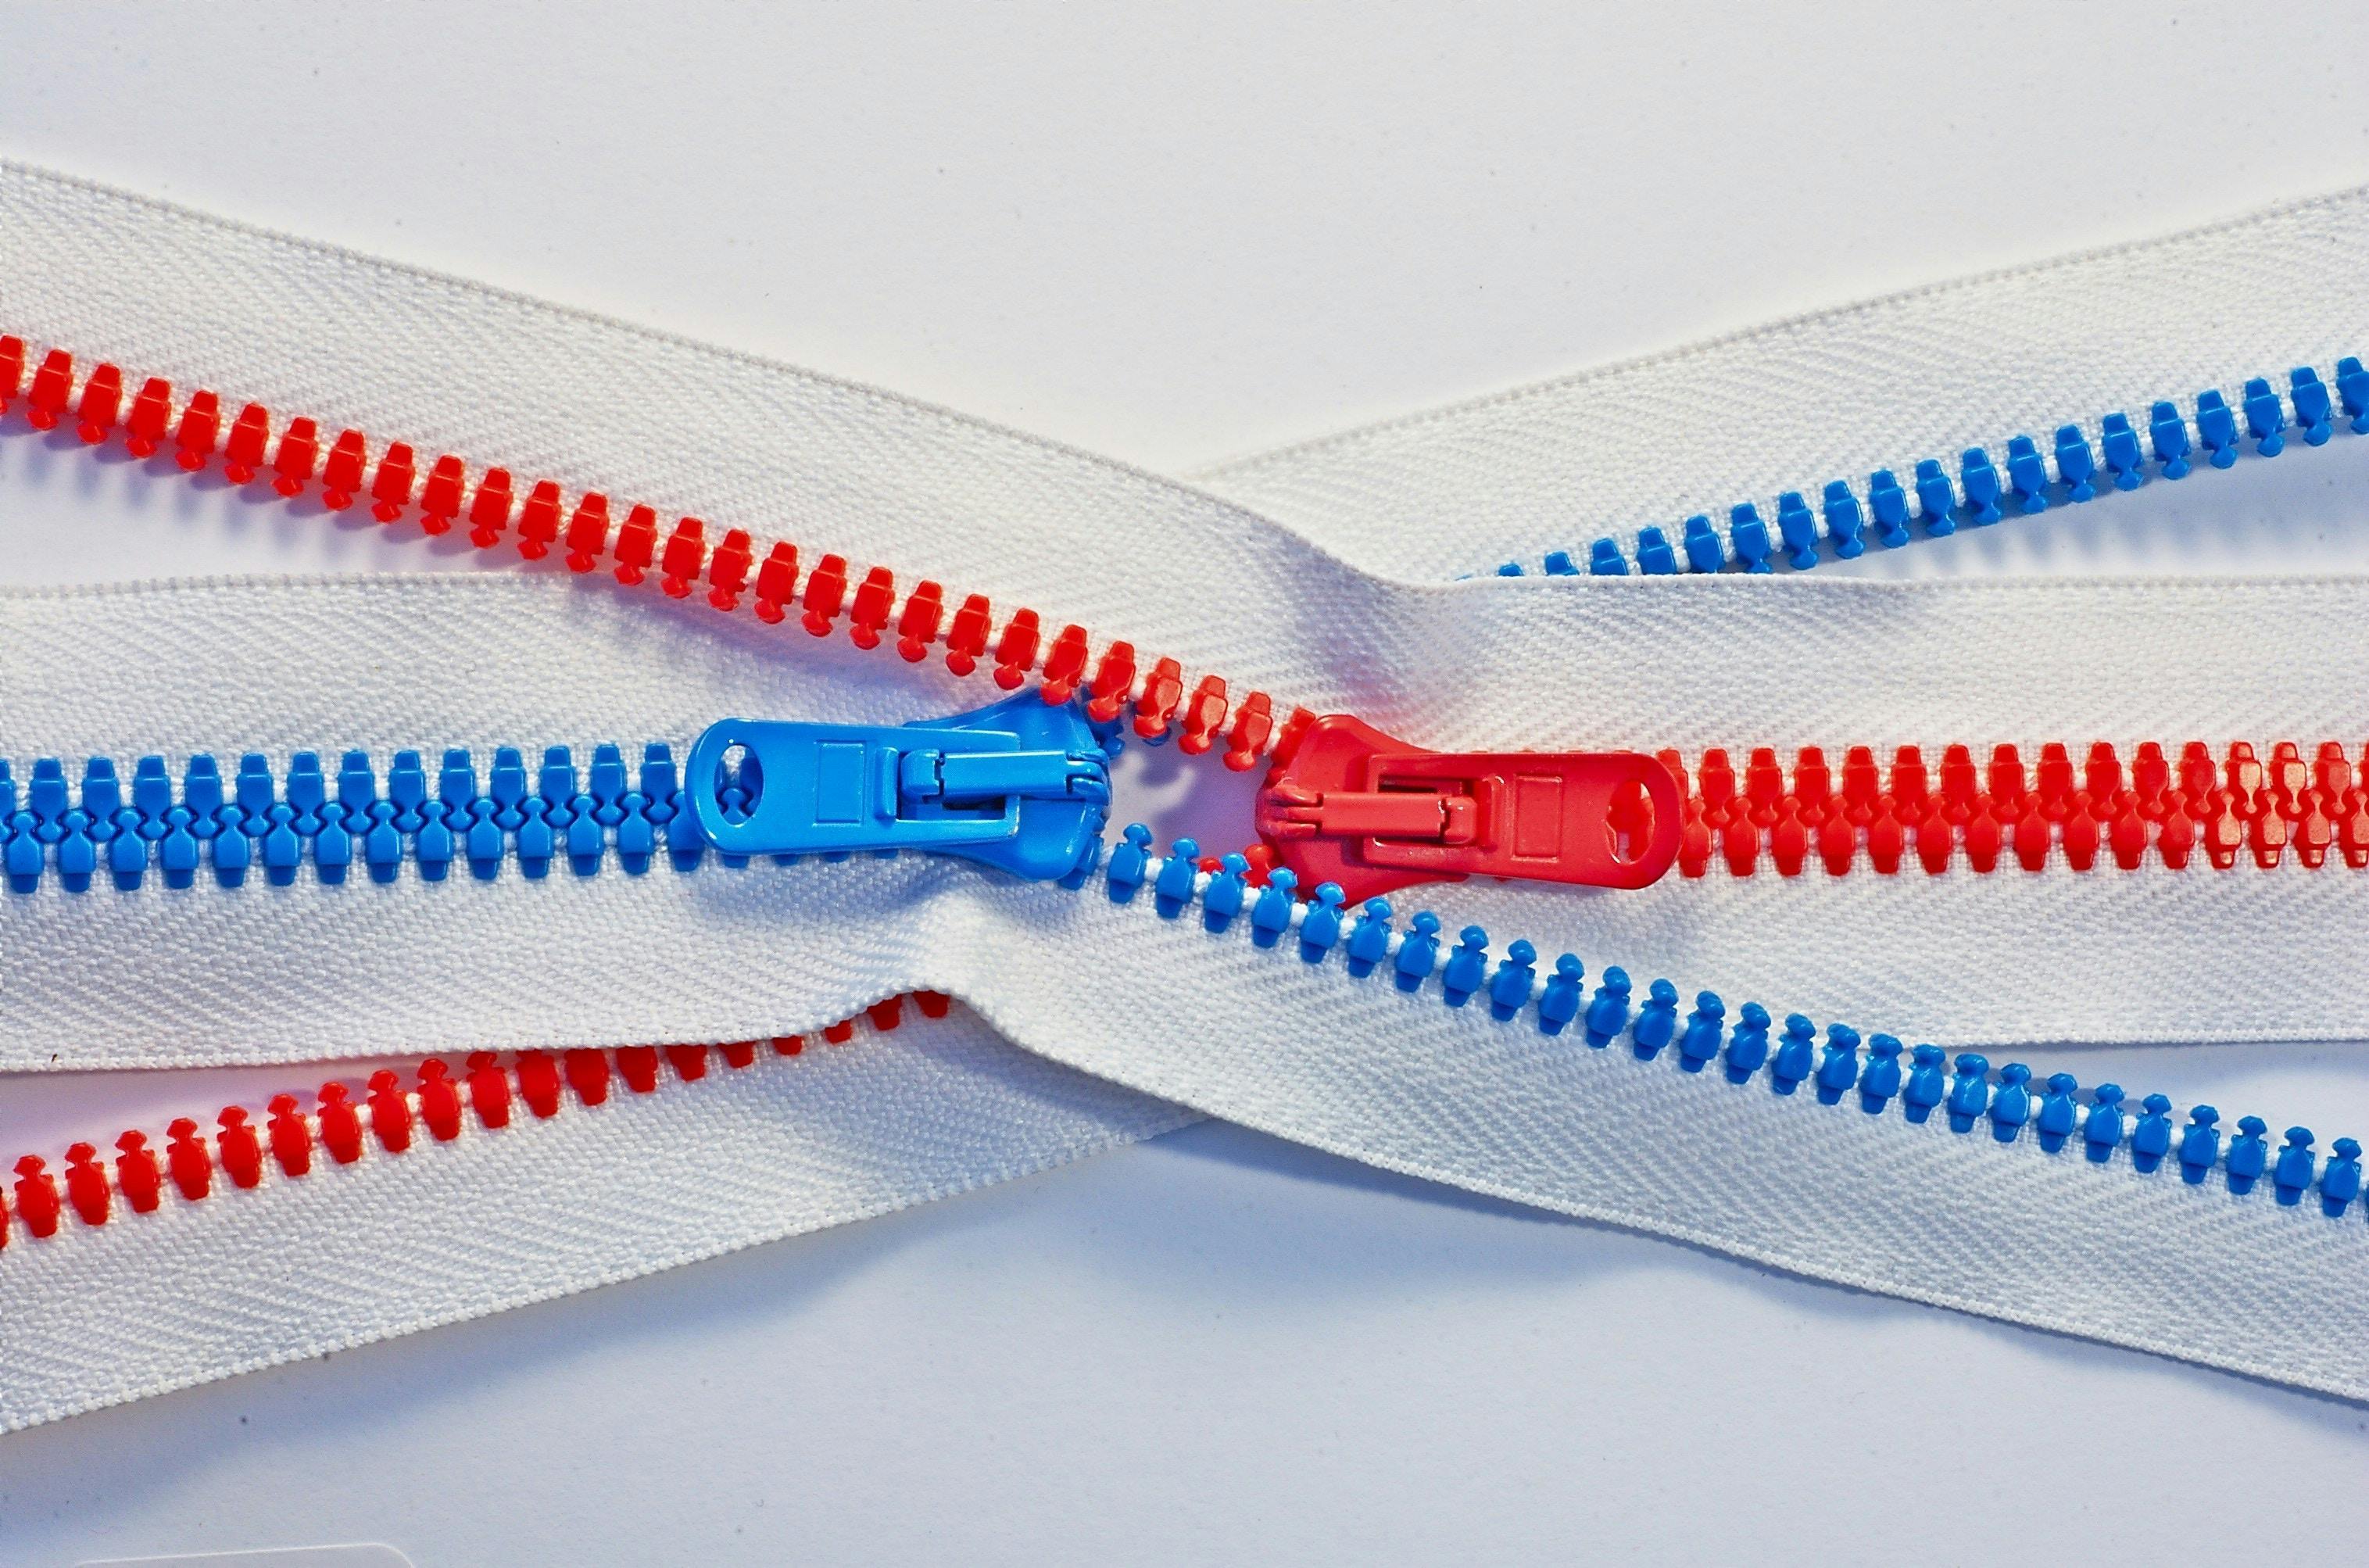 A red zipper and blue zipper interlocked and going in opposite directions.